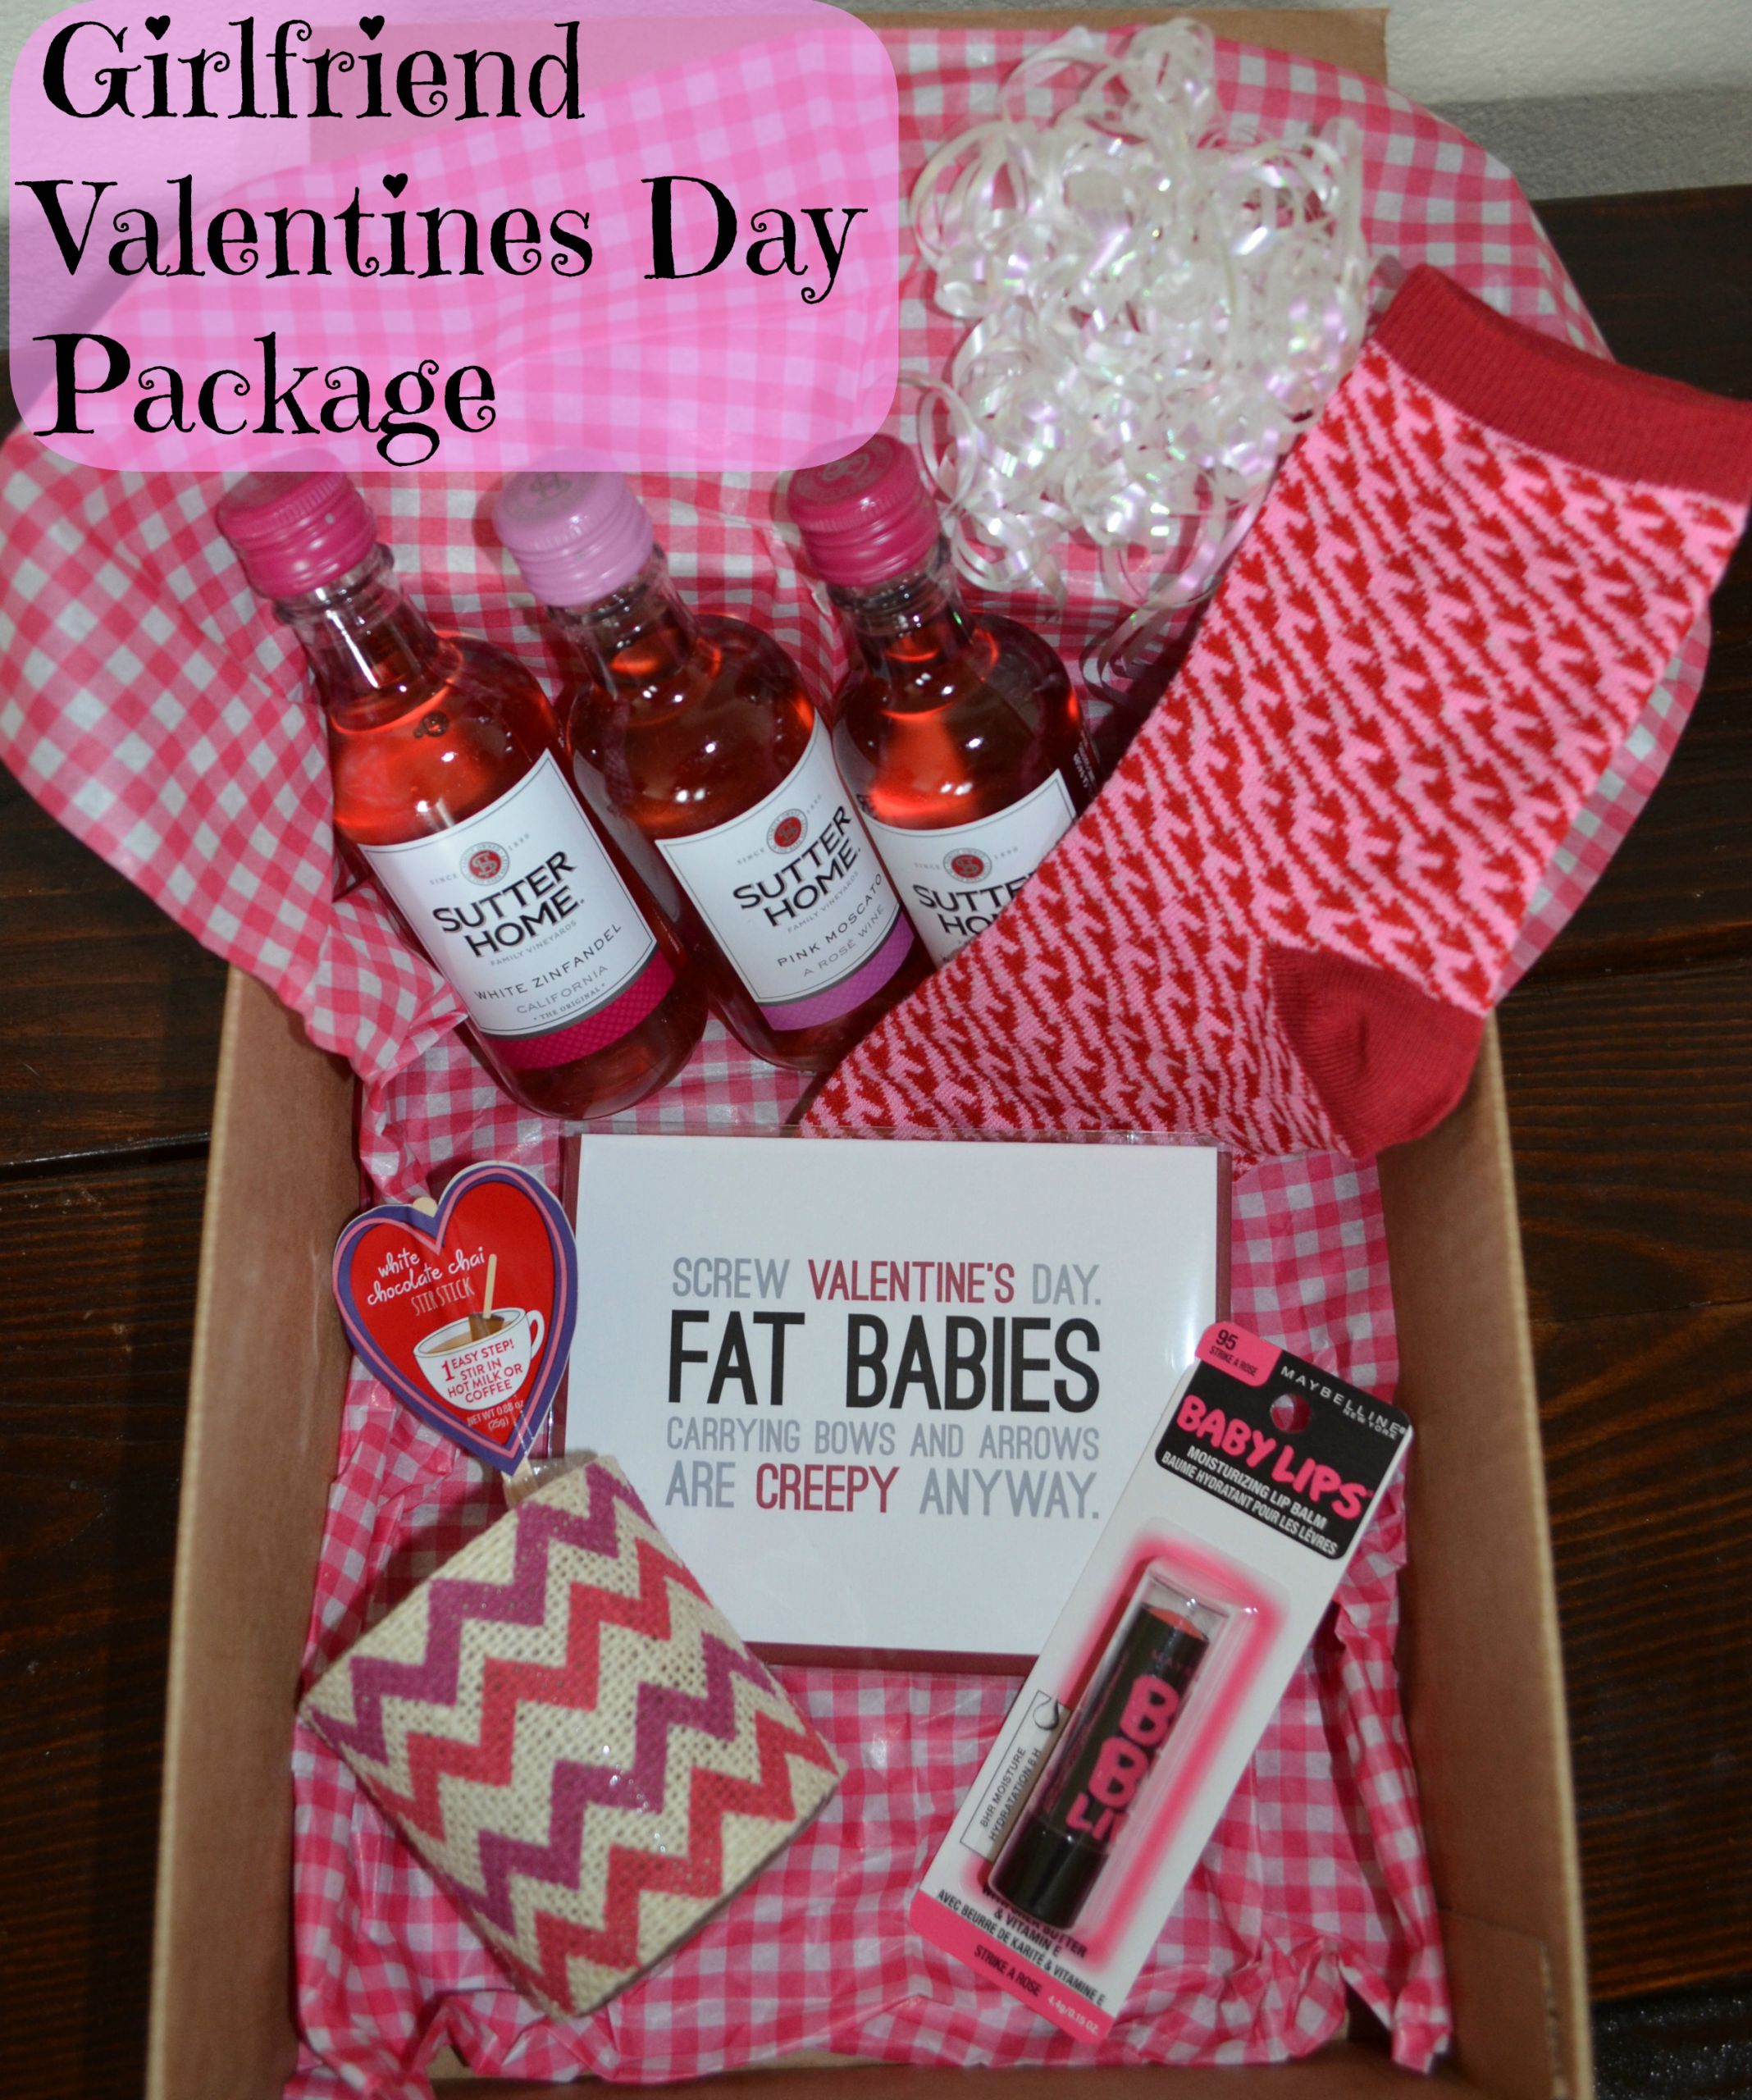 Valentines Day Gift Ideas For Wife
 24 ADORABLE GIFT IDEAS FOR THE WOMEN IN YOUR LIFE